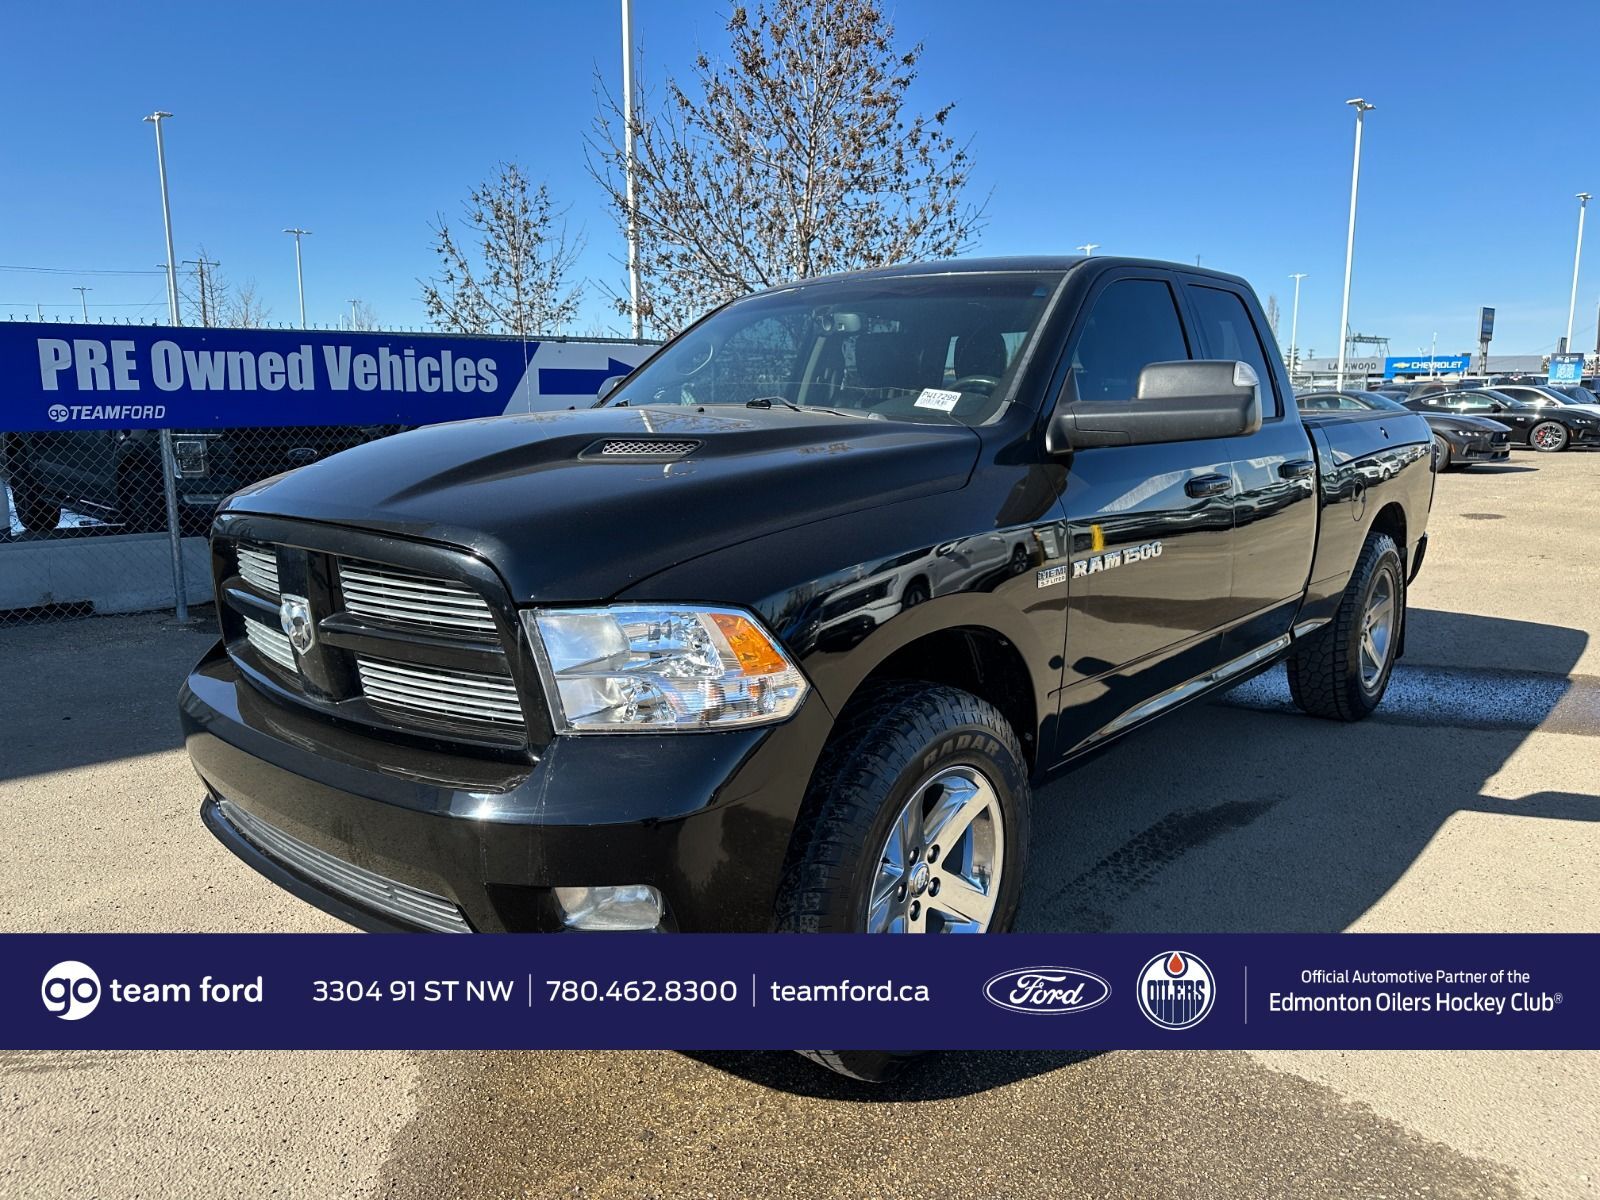 2012 Ram 1500 SPORT-4X4, CREWCAB, POWER OPTIONS AND MUCH MORE!!